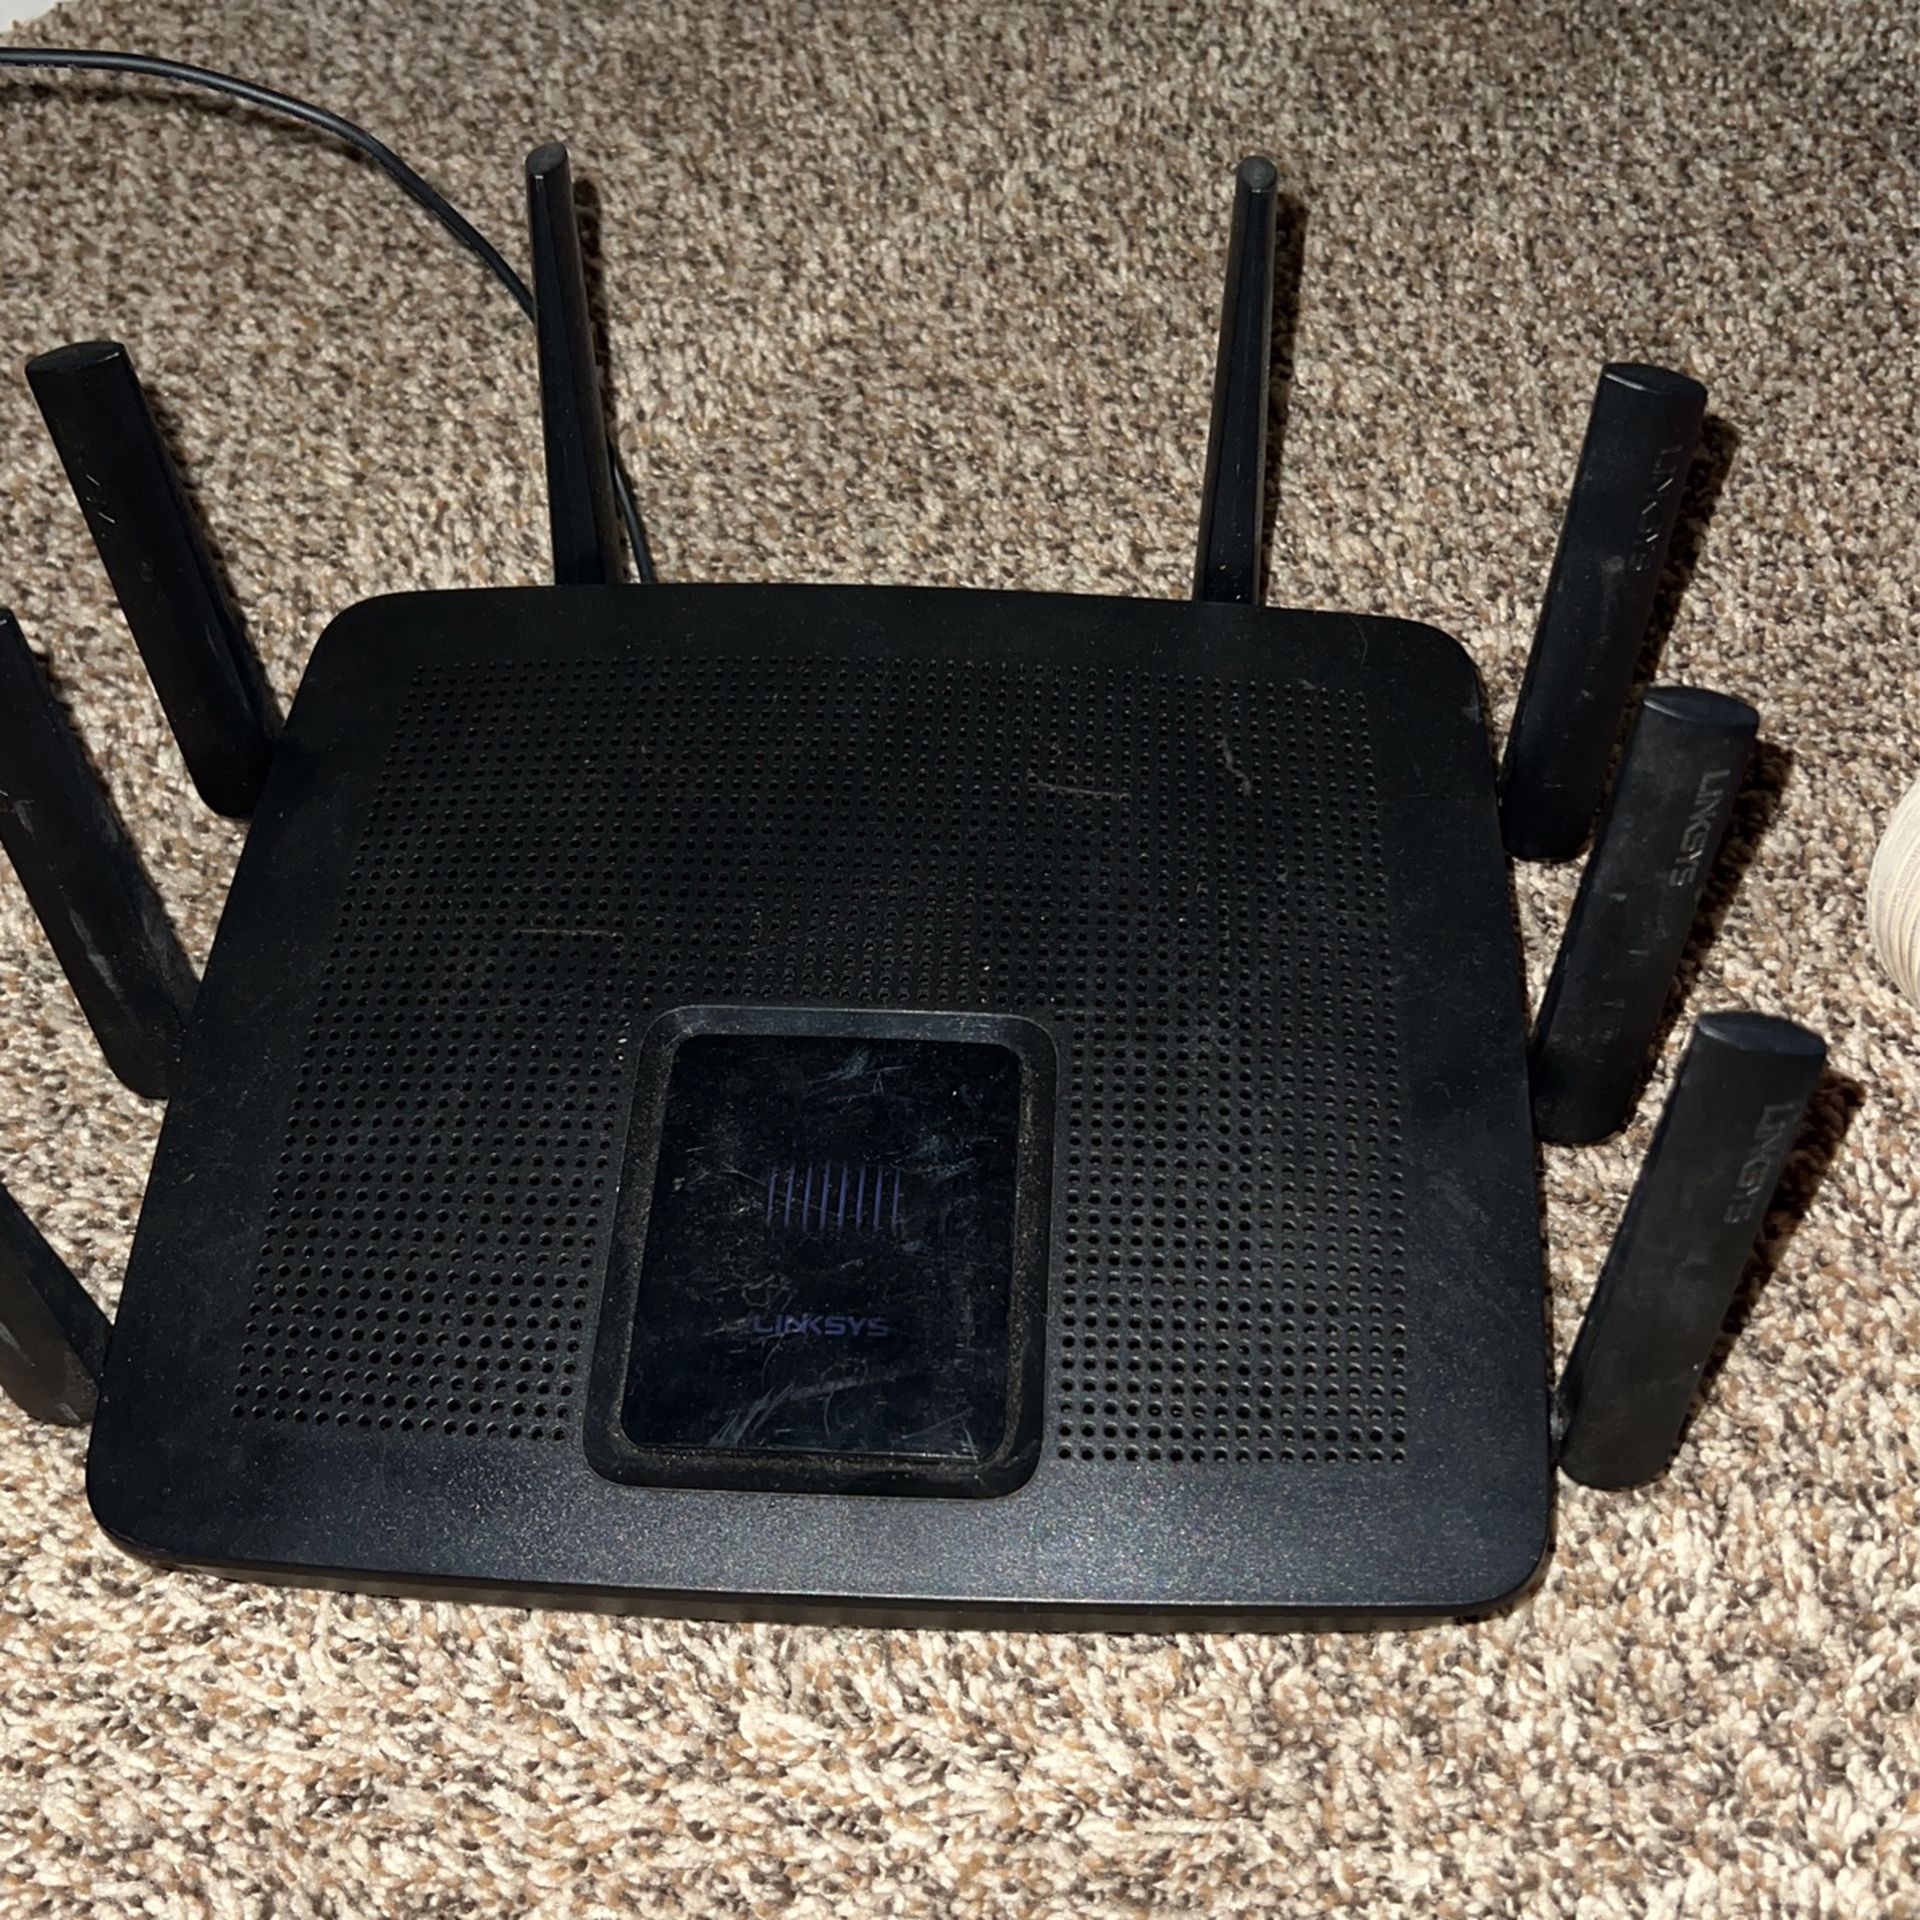 Linksys Router 